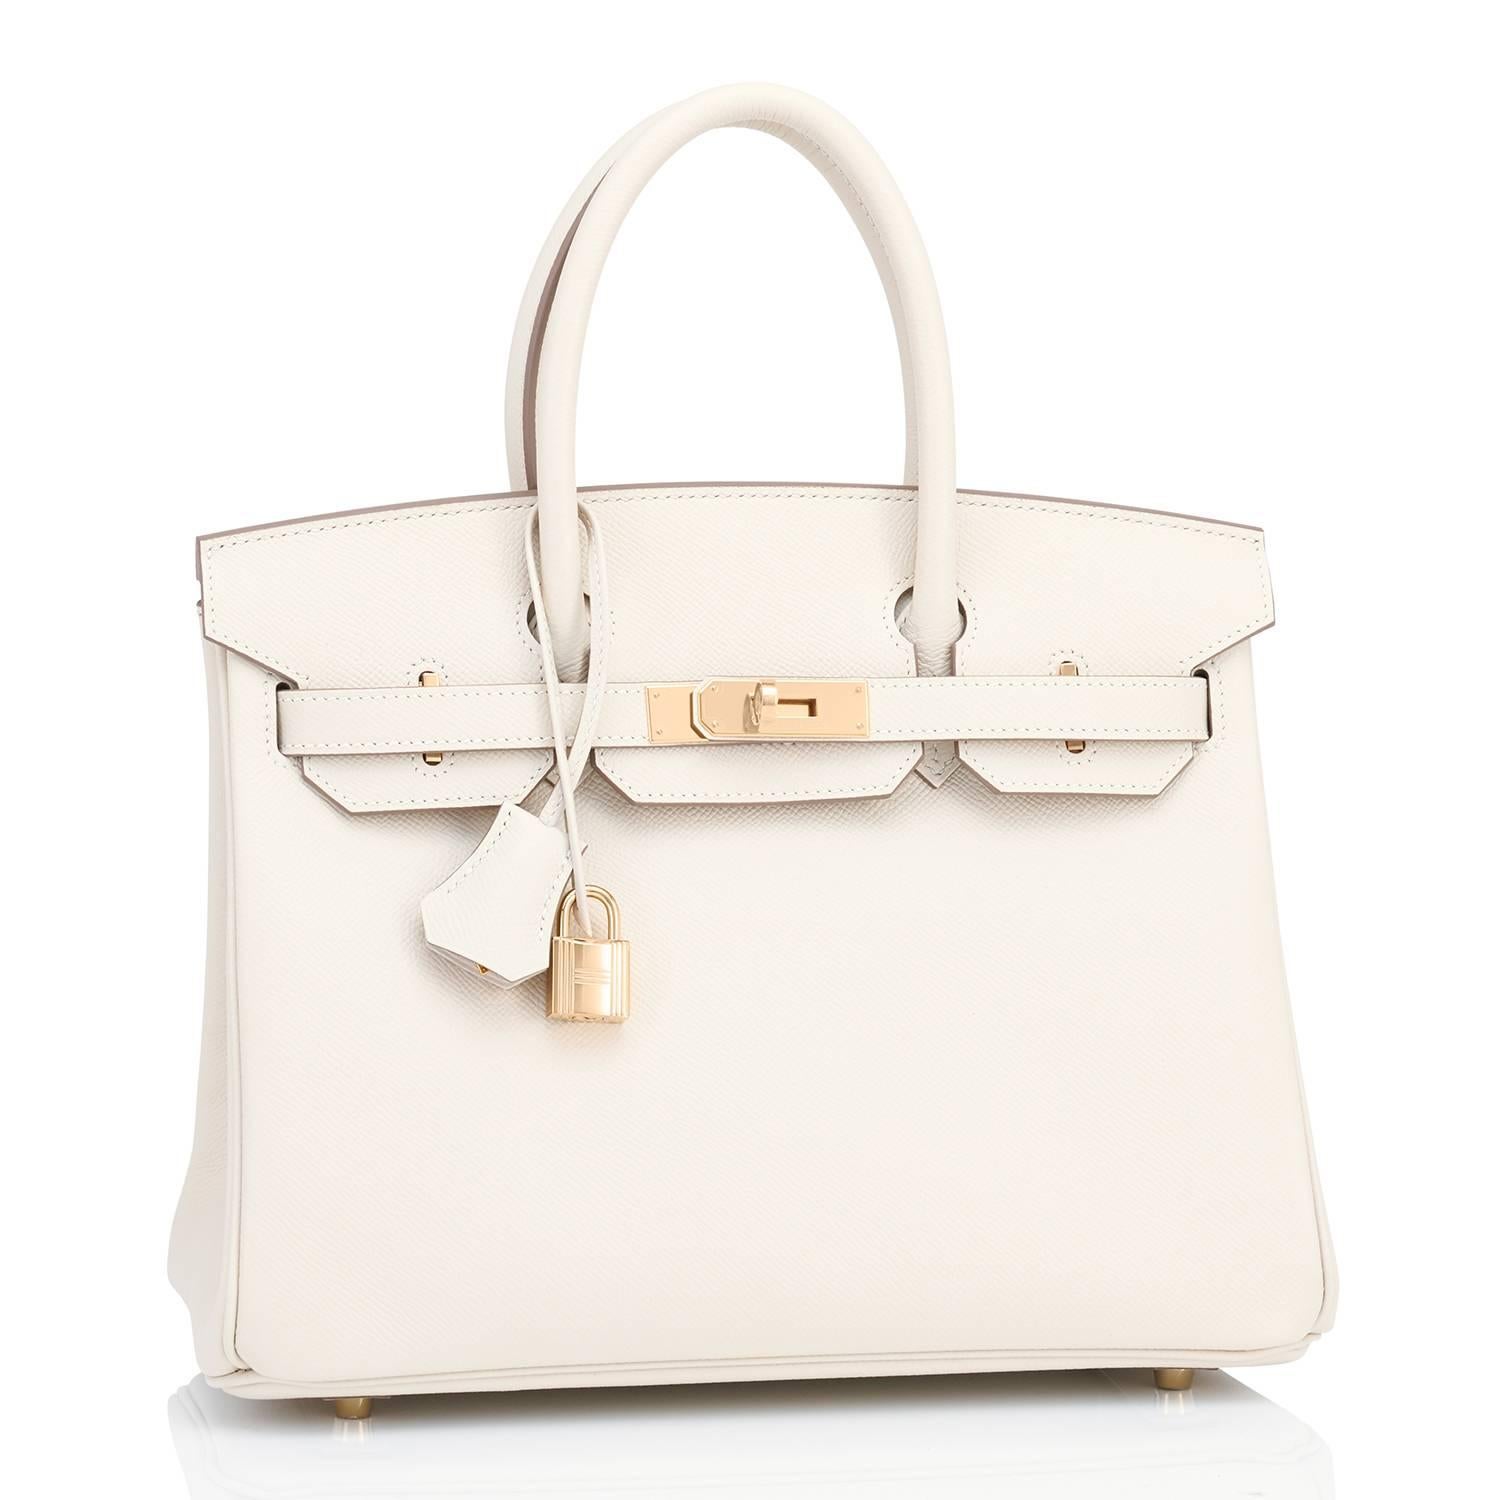 Hermes Craie 30cm Birkin Epsom Gold Hardware Off White Summer
Brand New in Box. Store fresh. Pristine Condition (with plastic on hardware)
Just purchased from Hermes store; bag bears new 2017 interior A stamp.
Perfect gift! Comes in full set with